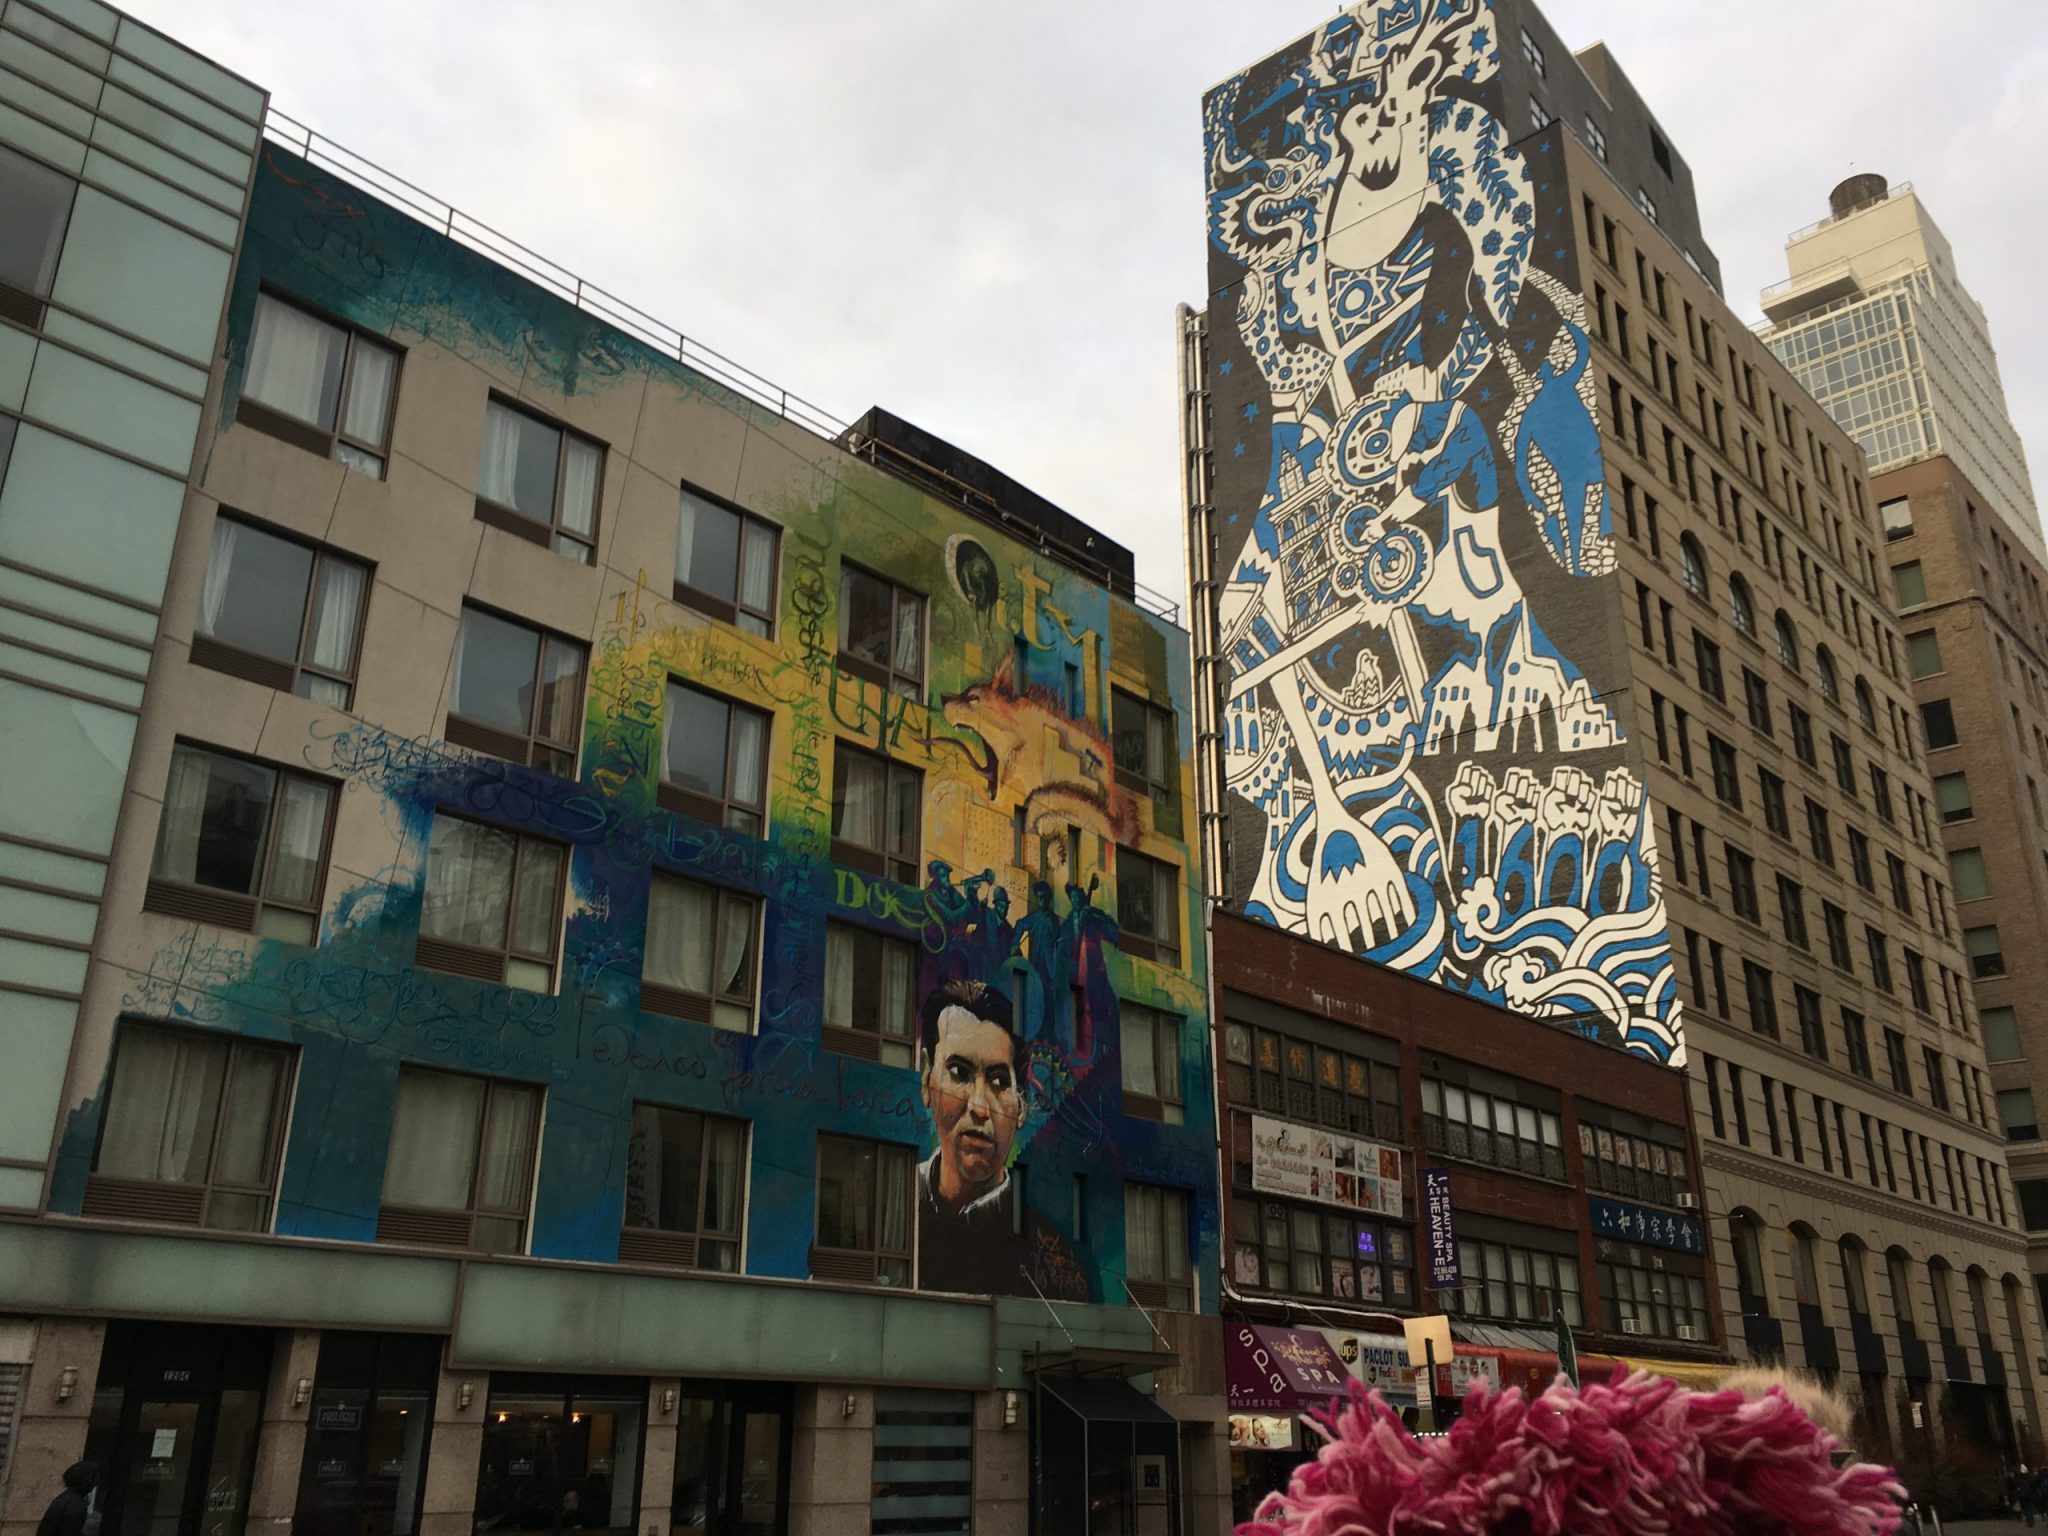 Some murals found in New York City on New Year's Eve